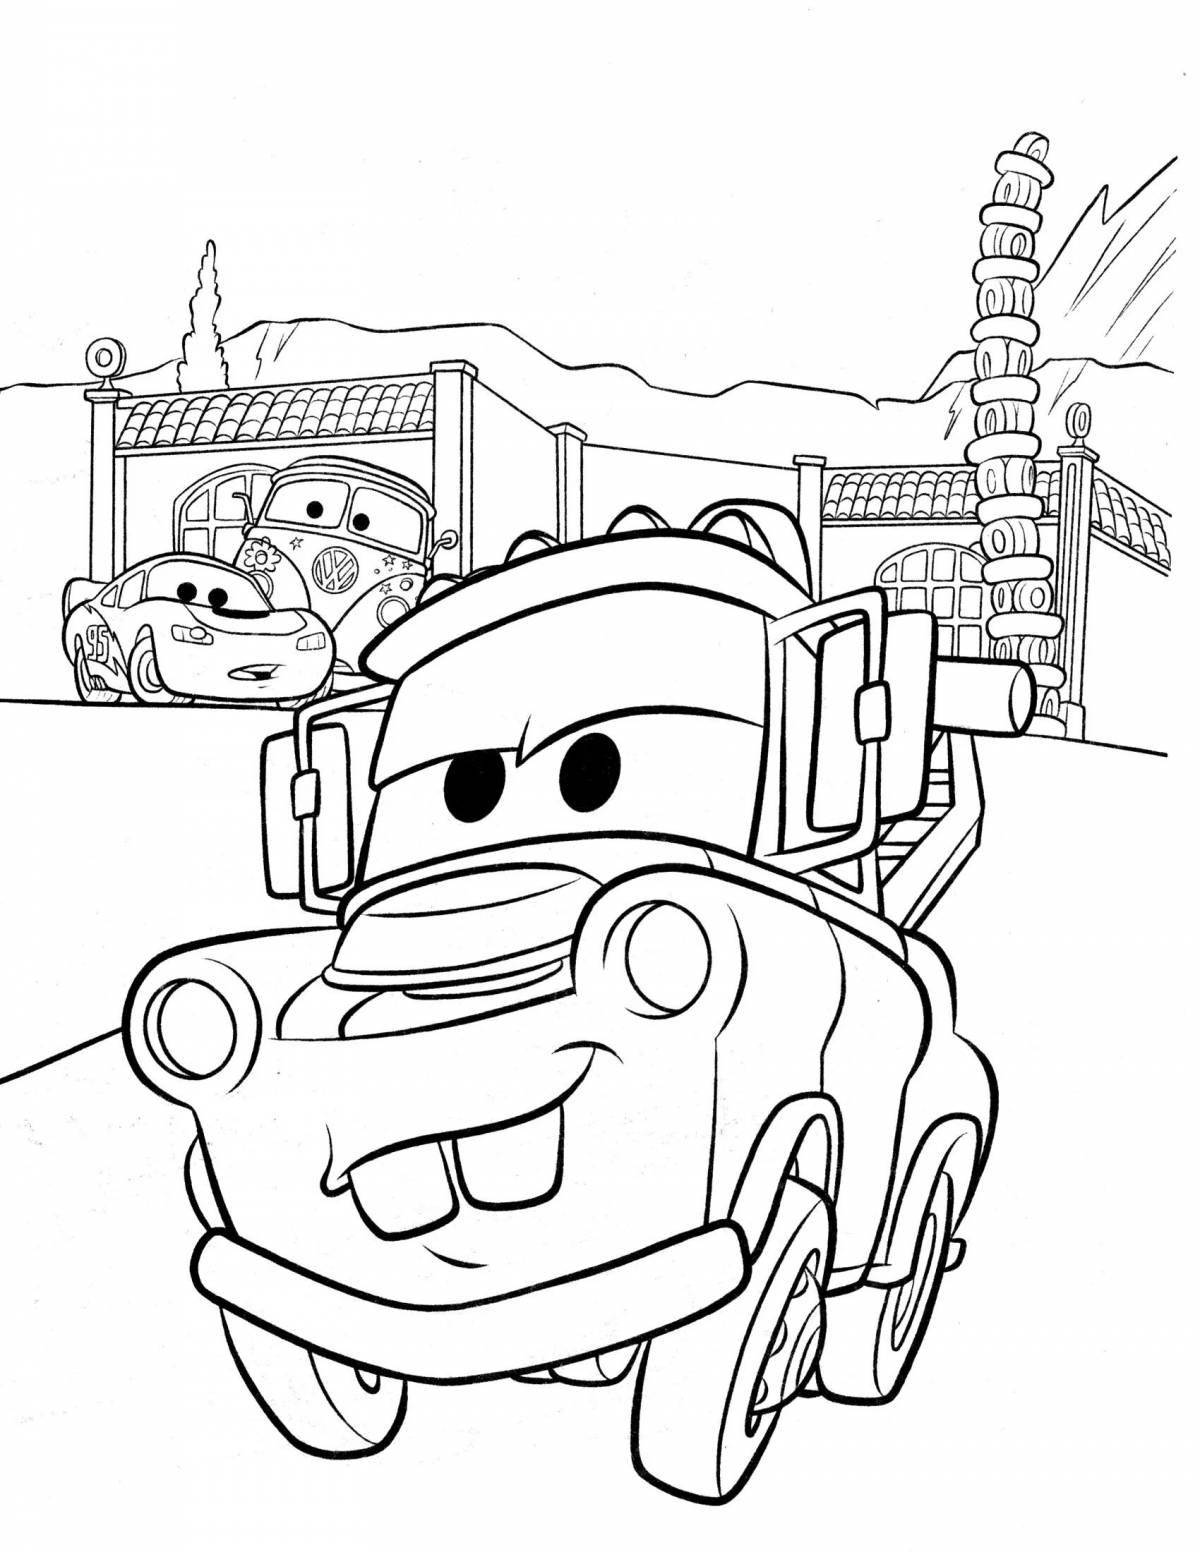 Creative cartoon coloring book for 5-6 year old boys